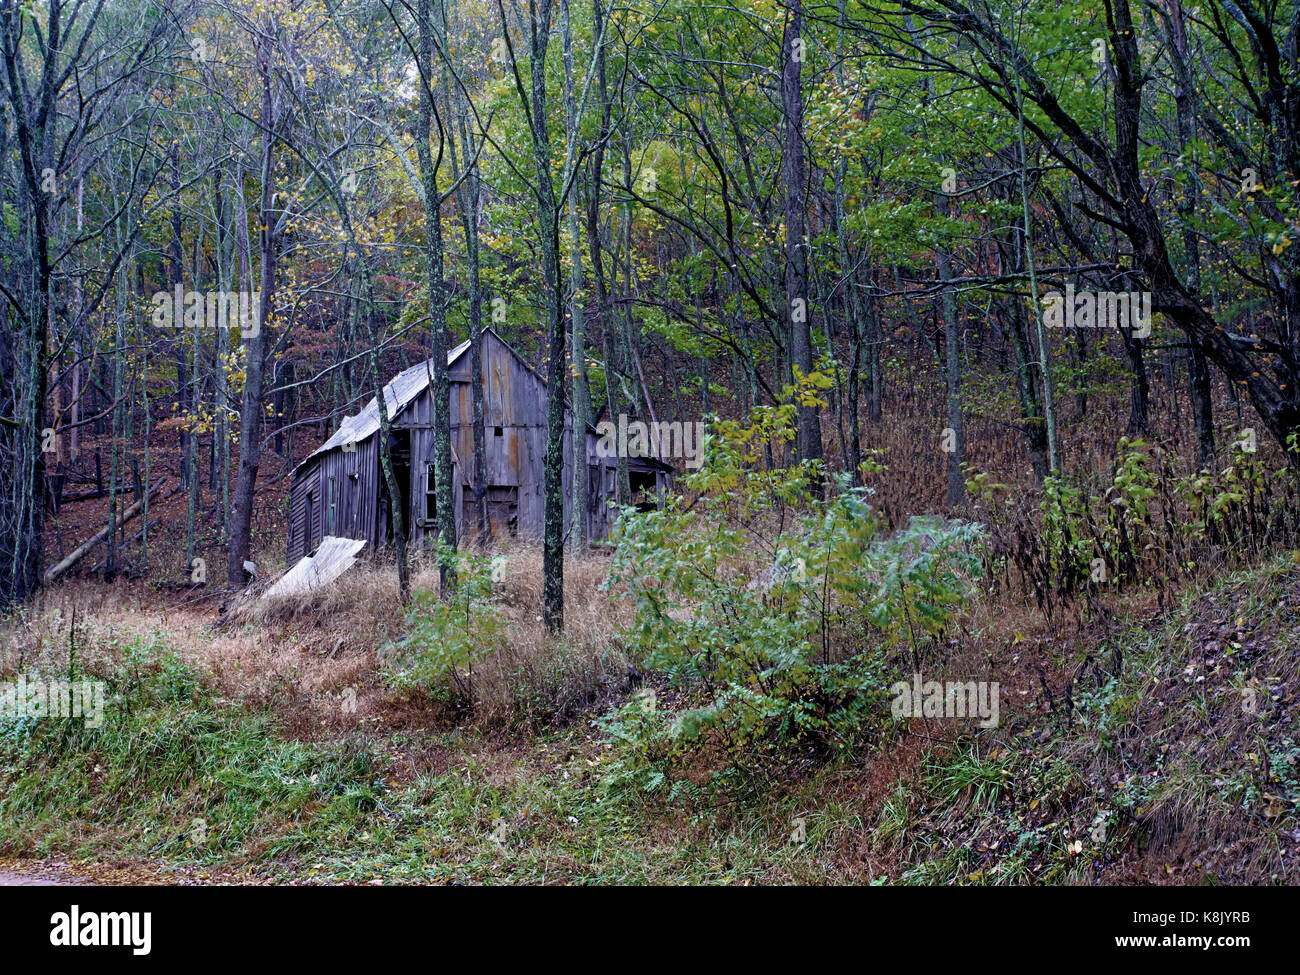 A view of an isolated cabin in a remote part of rural Georgia, USA Stock Photo